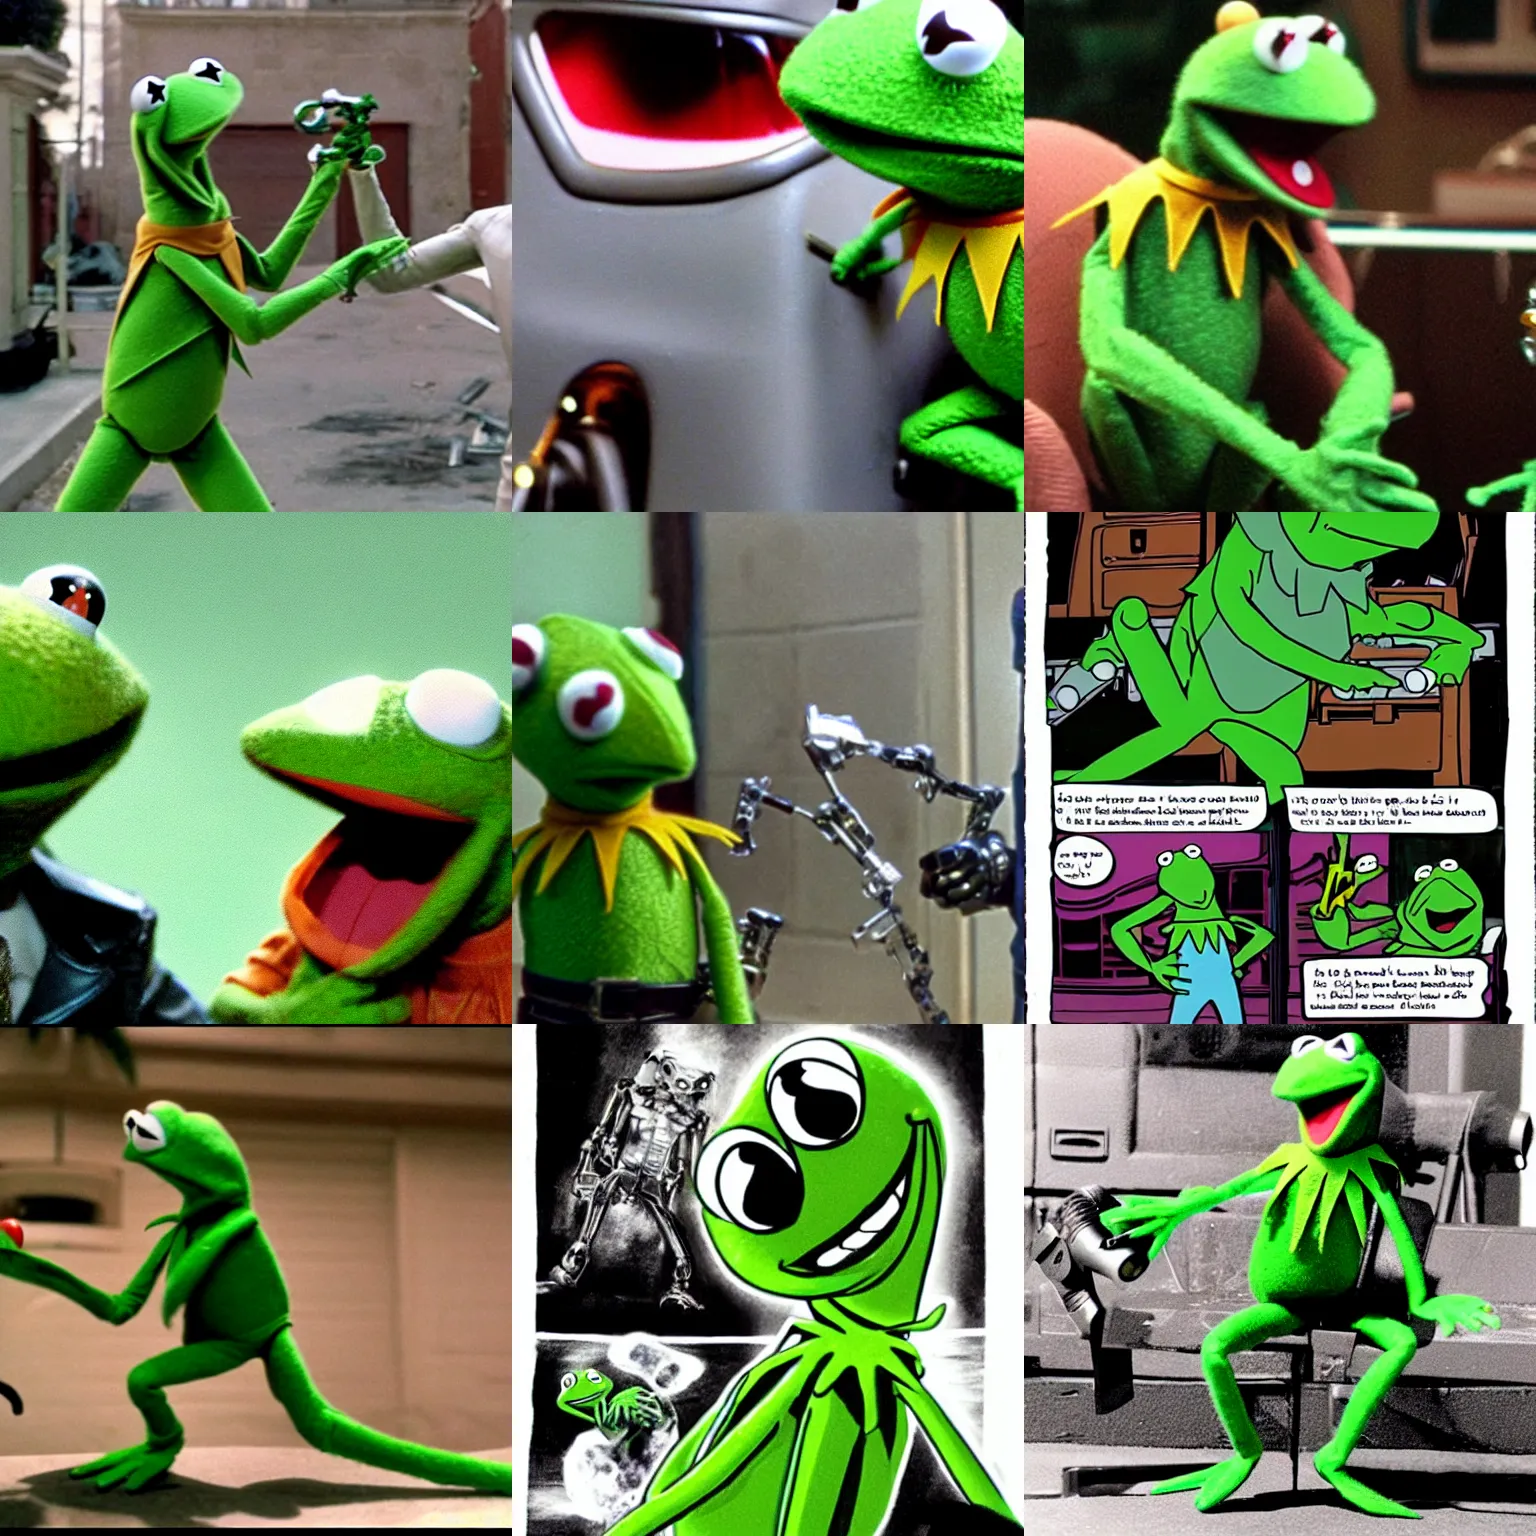 Prompt: Kermit the frog fighting the Terminator, style film